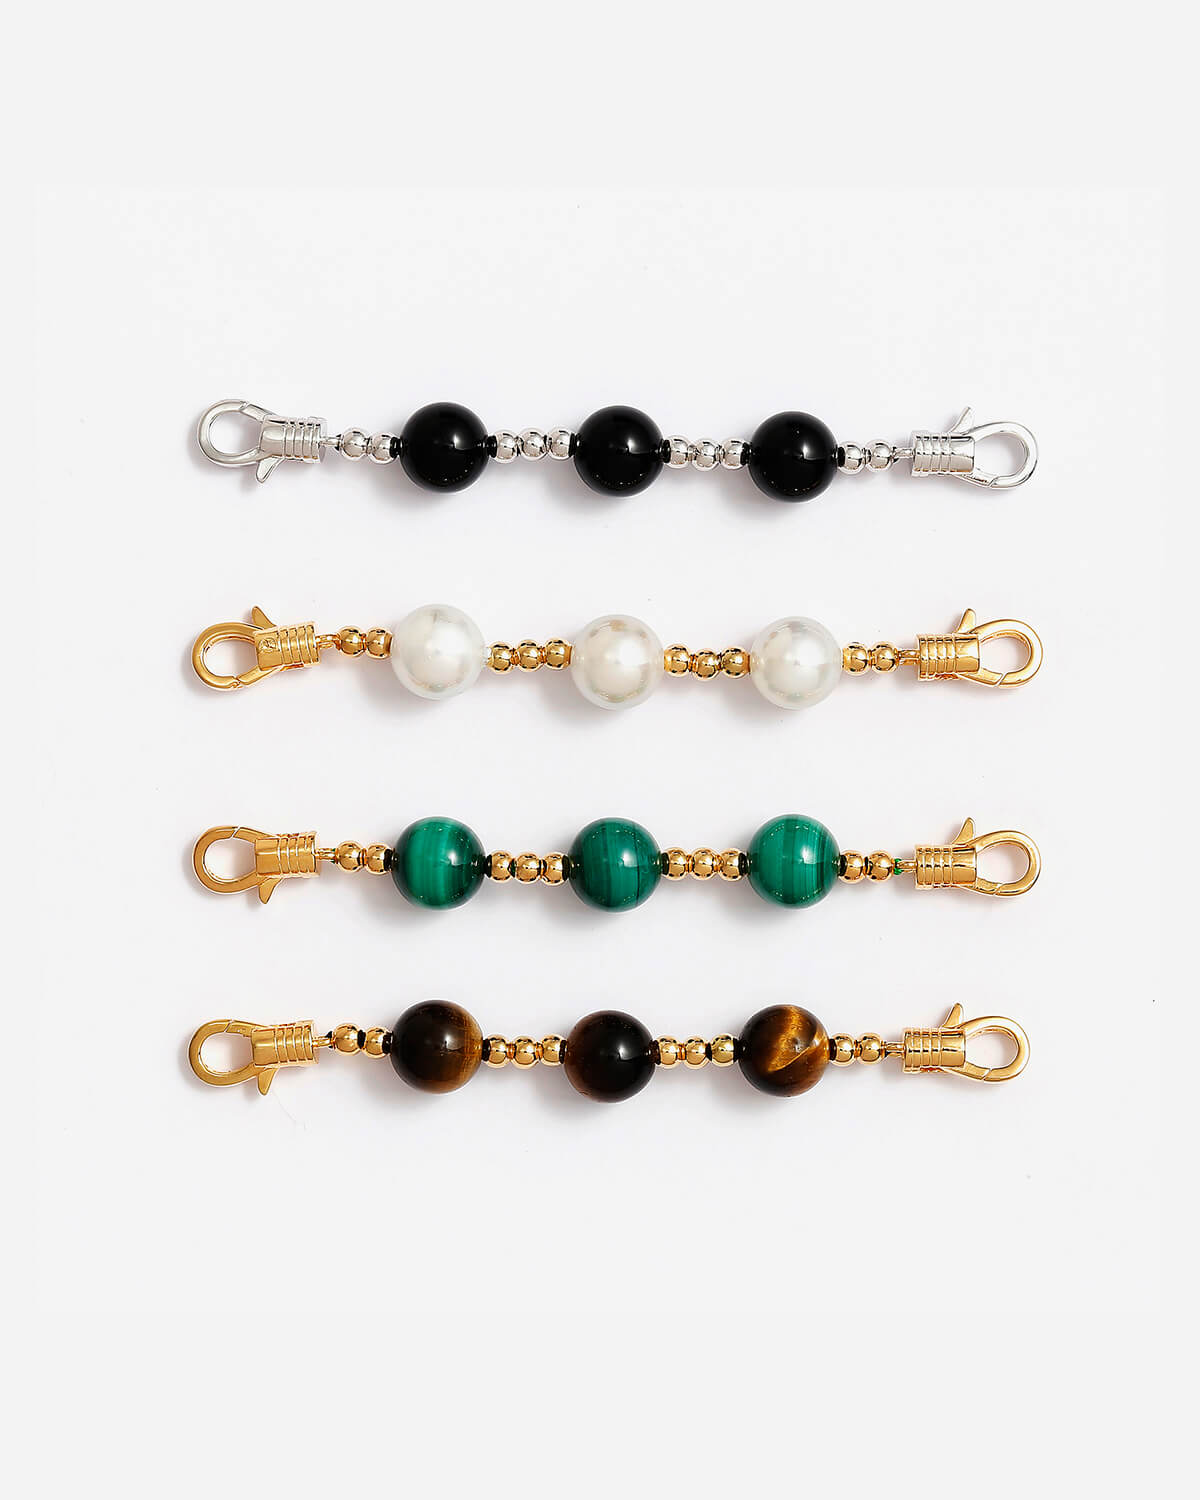 a set of four key chains with different colored beads